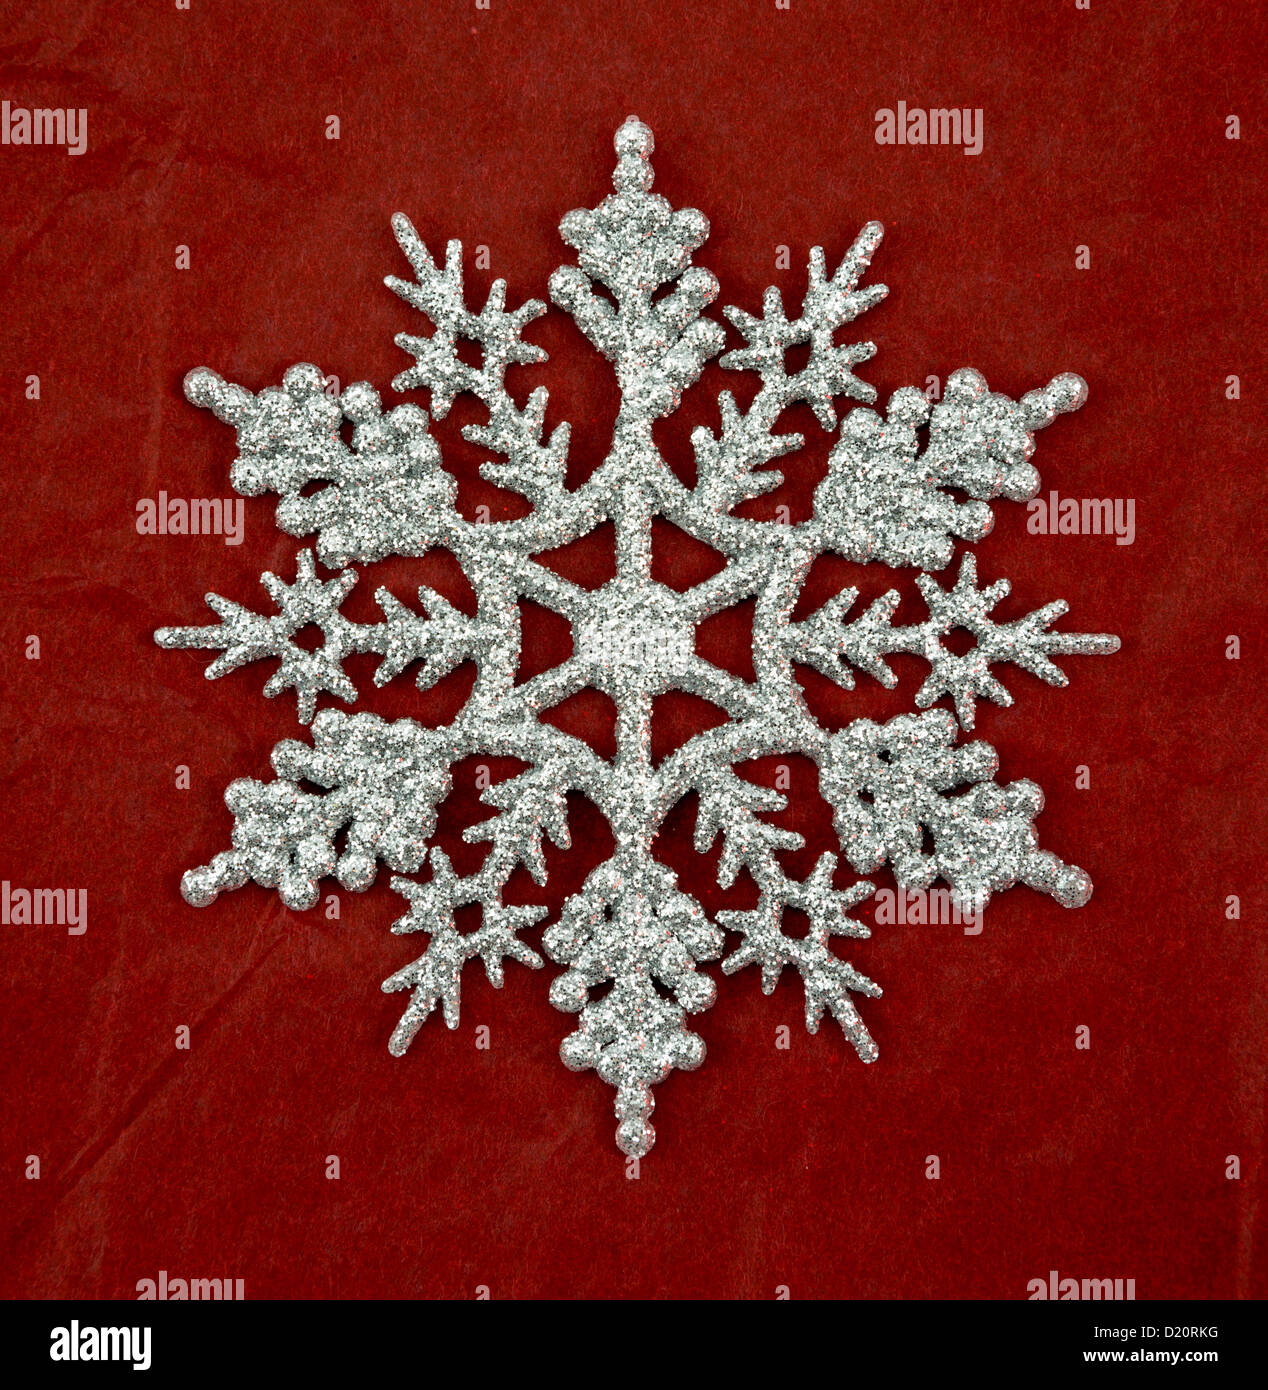 Silver glitter snowflake christmas ornament on a red background. Stock Photo